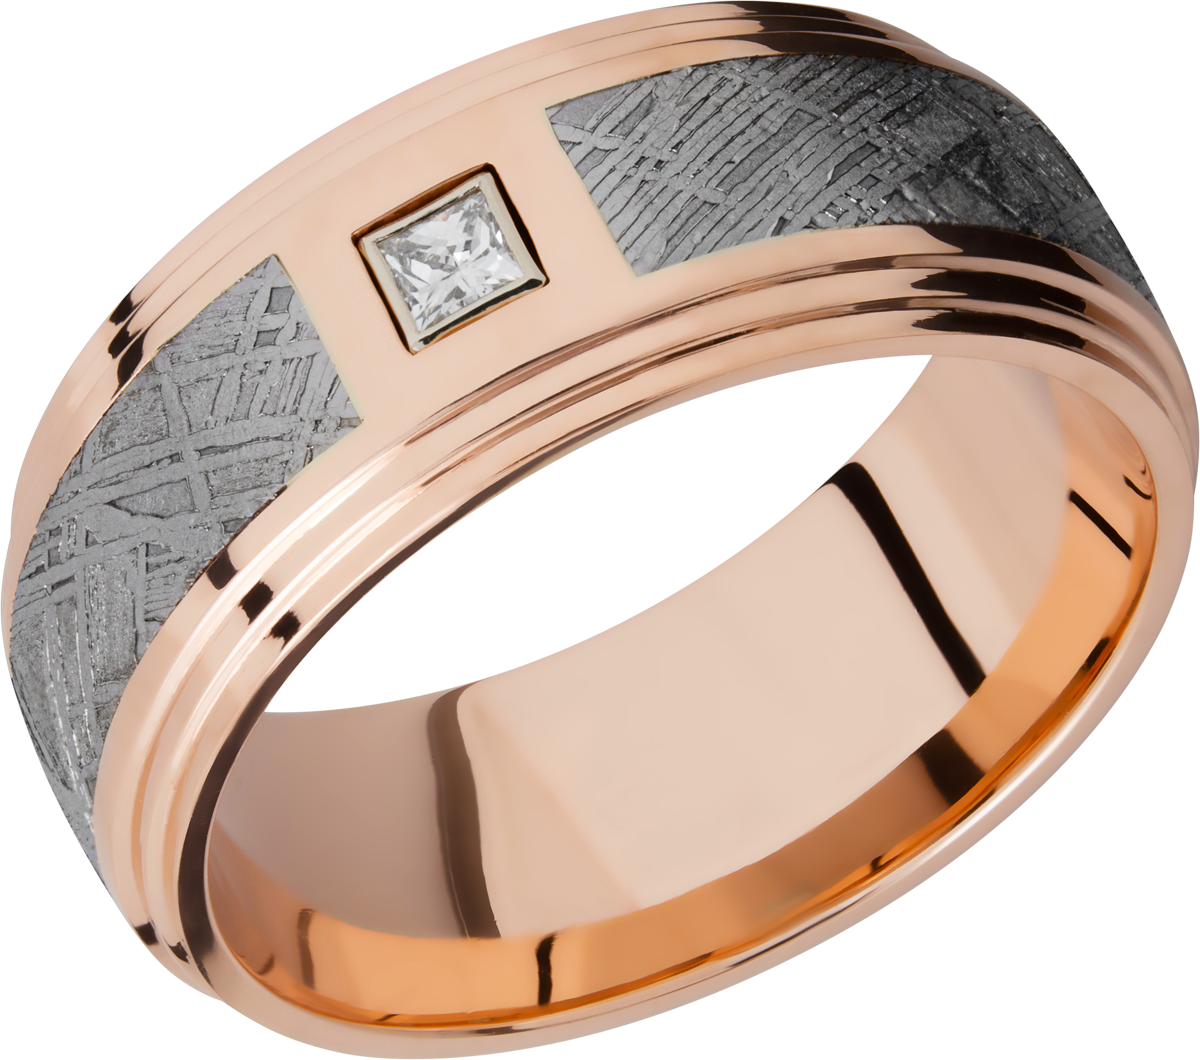 14k rose gold 9mm flat band with 2 step edges, with one inlay that is 4.5mm wide of meteorite. Has